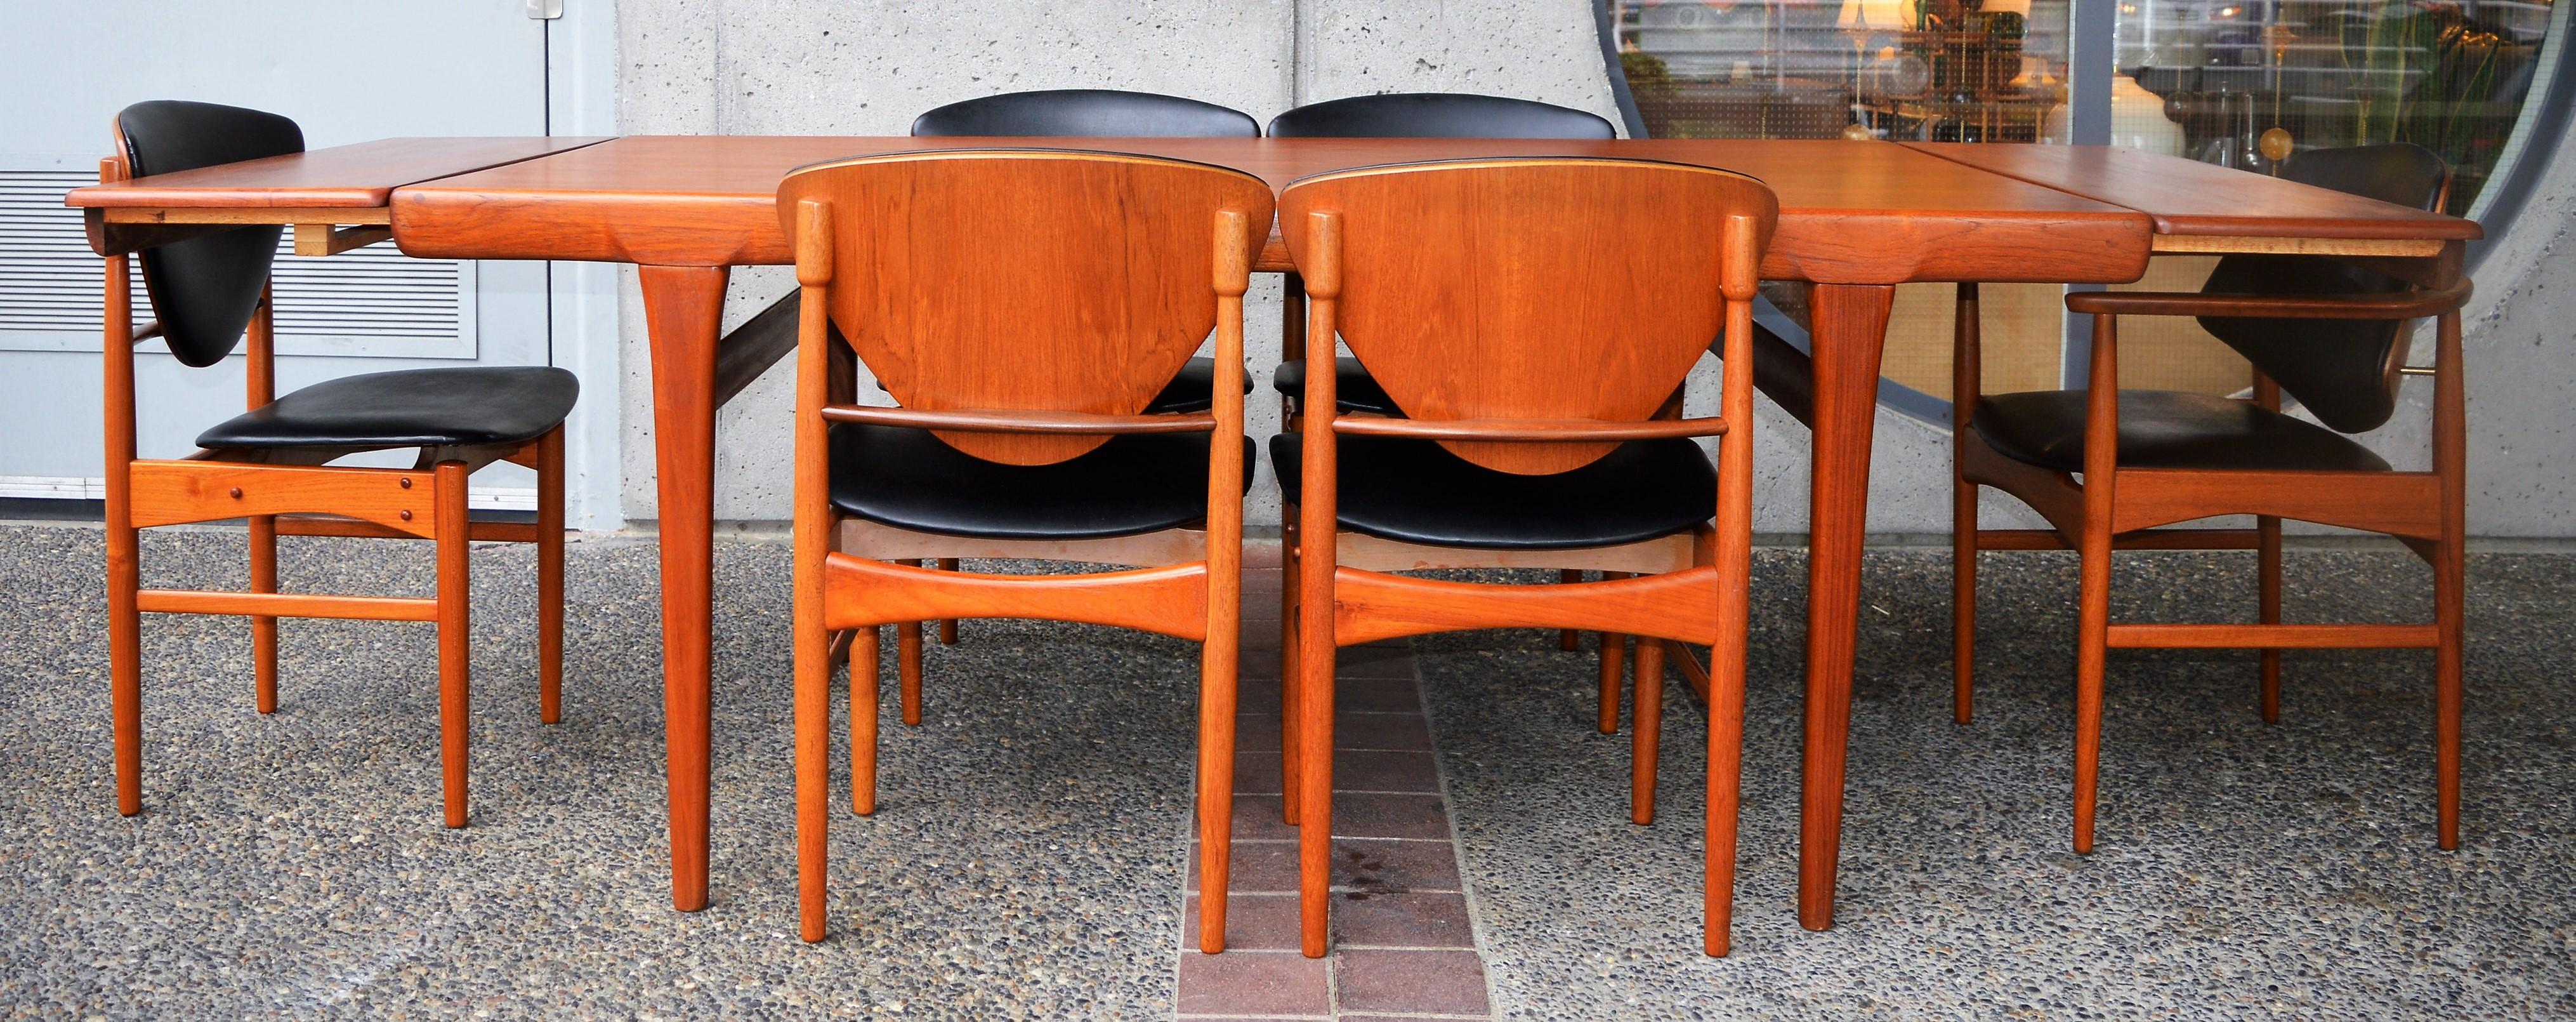 These are incredibly rare and stunning teak dining chairs by Arne Hovmand Olsen in the 1950s with five side chairs and one curved armchair / head chair / carver. Sultry sculptural details throughout, with a teak frame with afromesia teak braces on